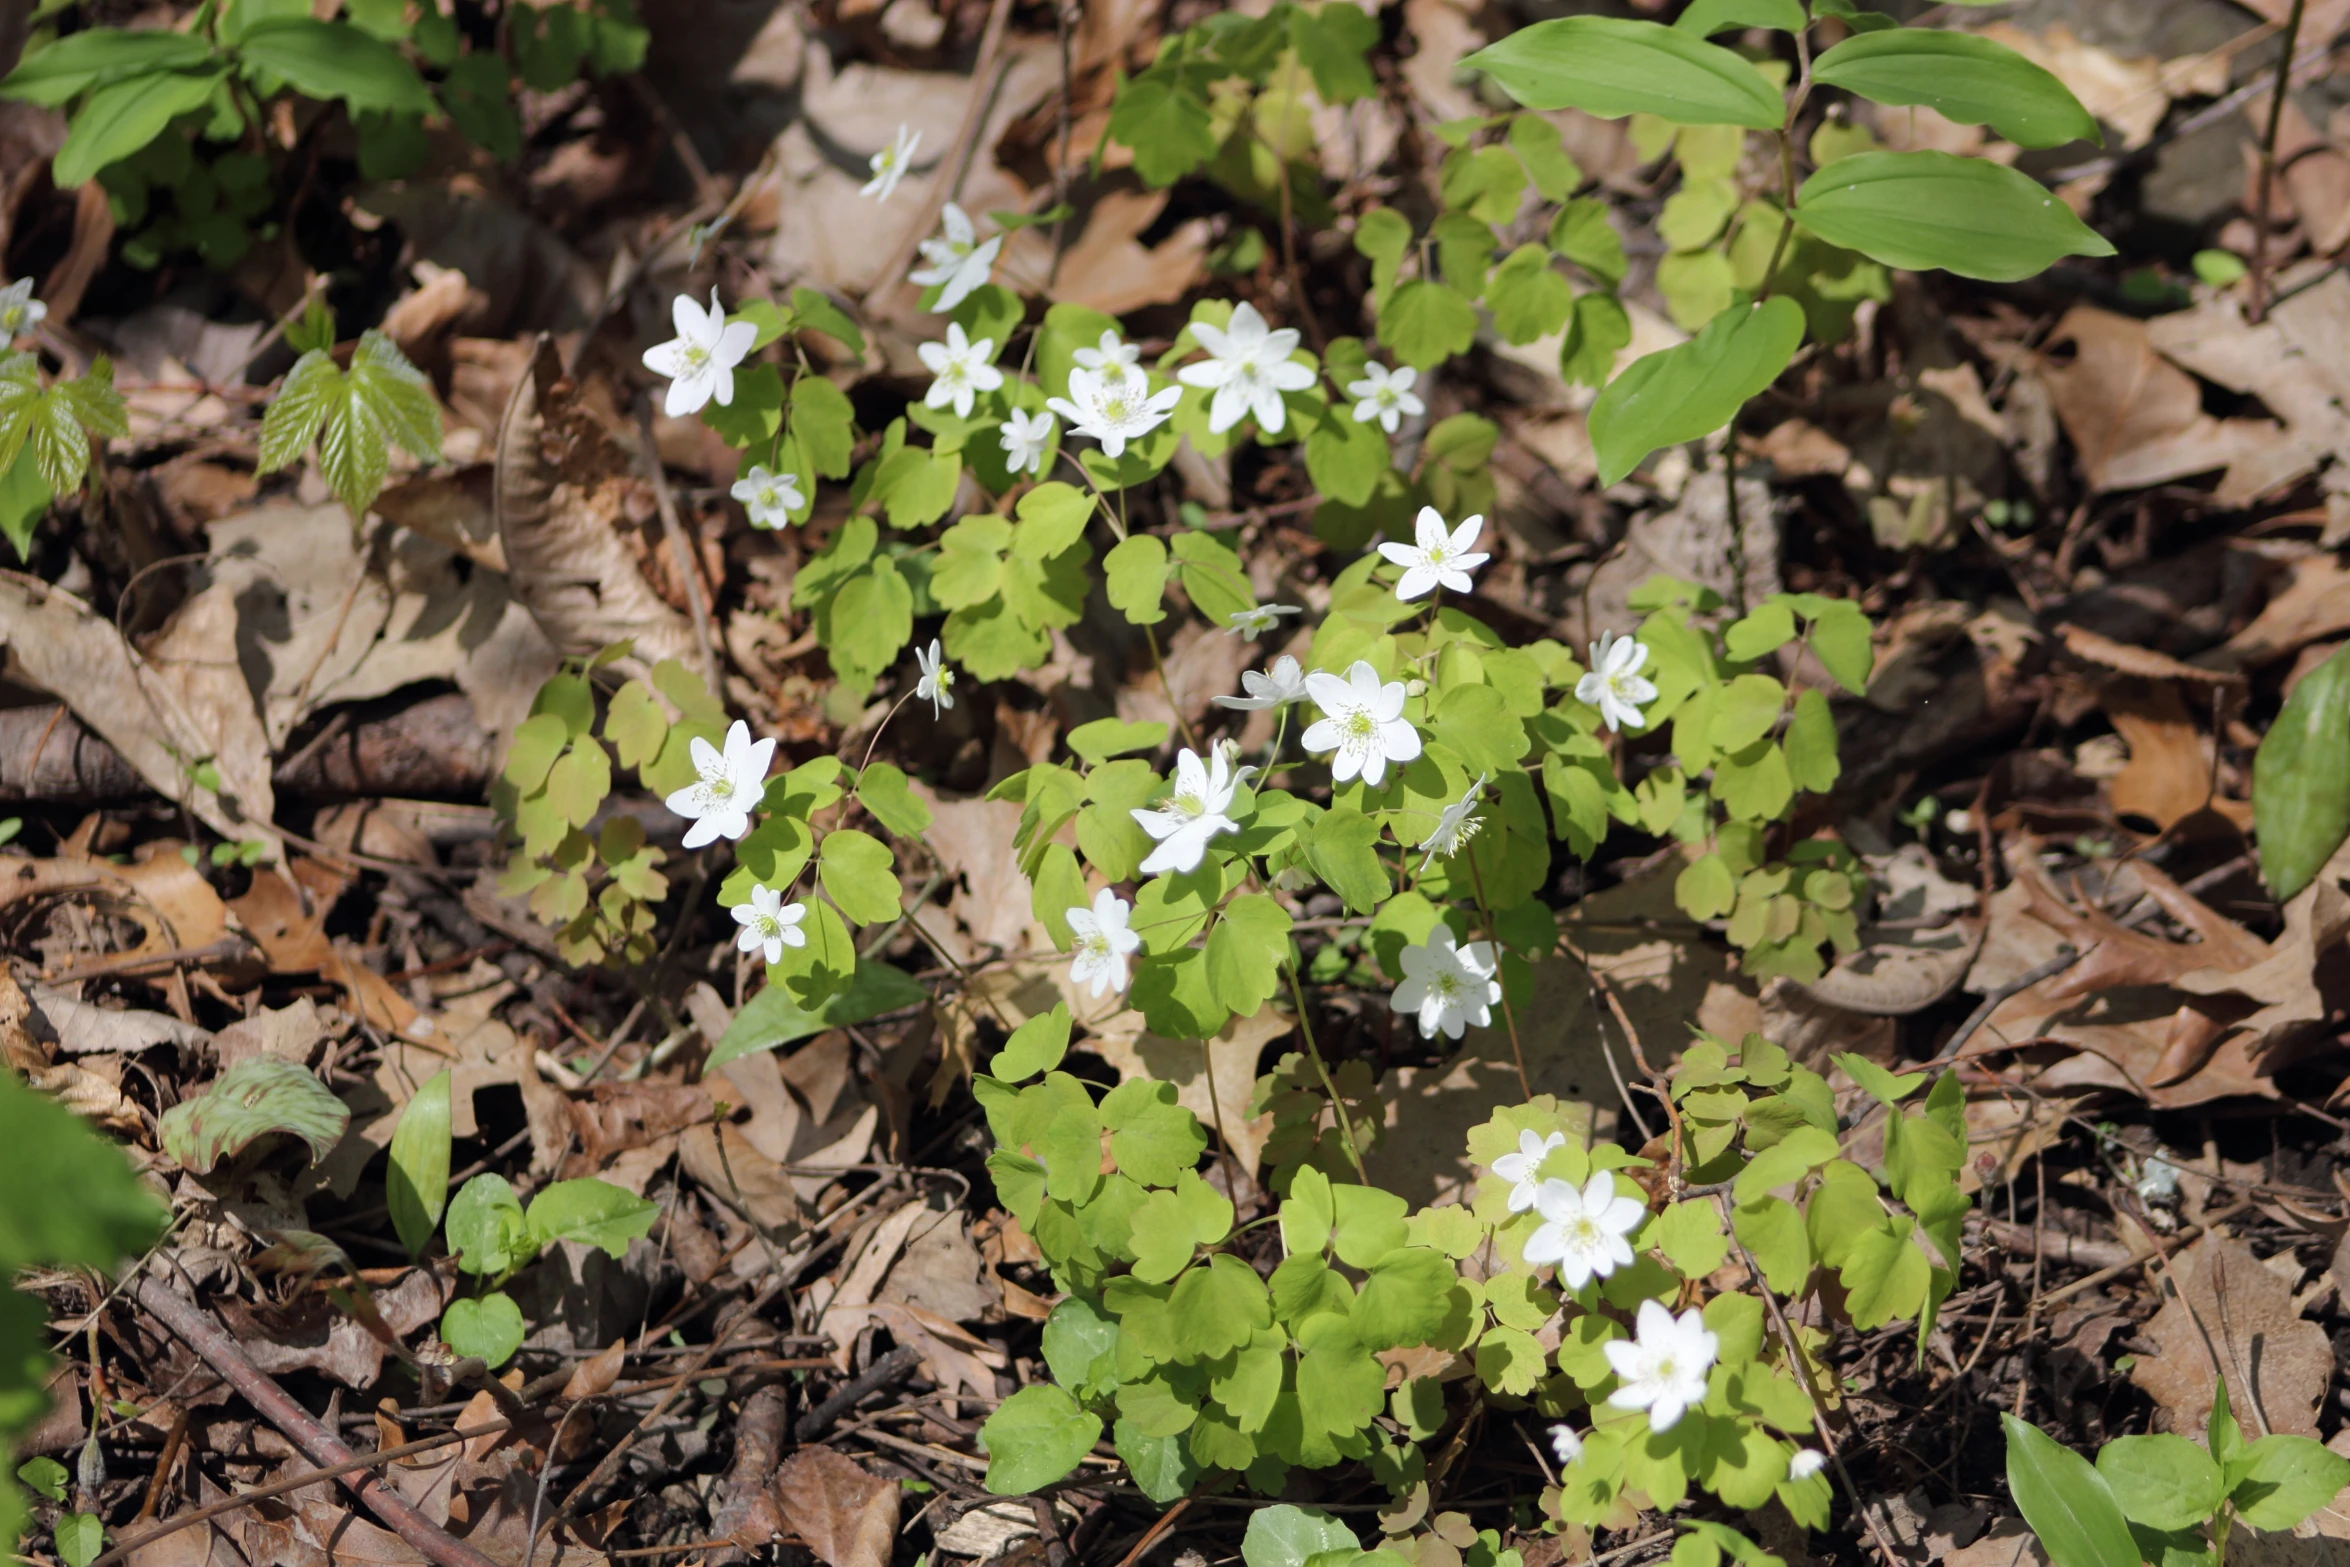 a small group of white flowers sitting on the leaves